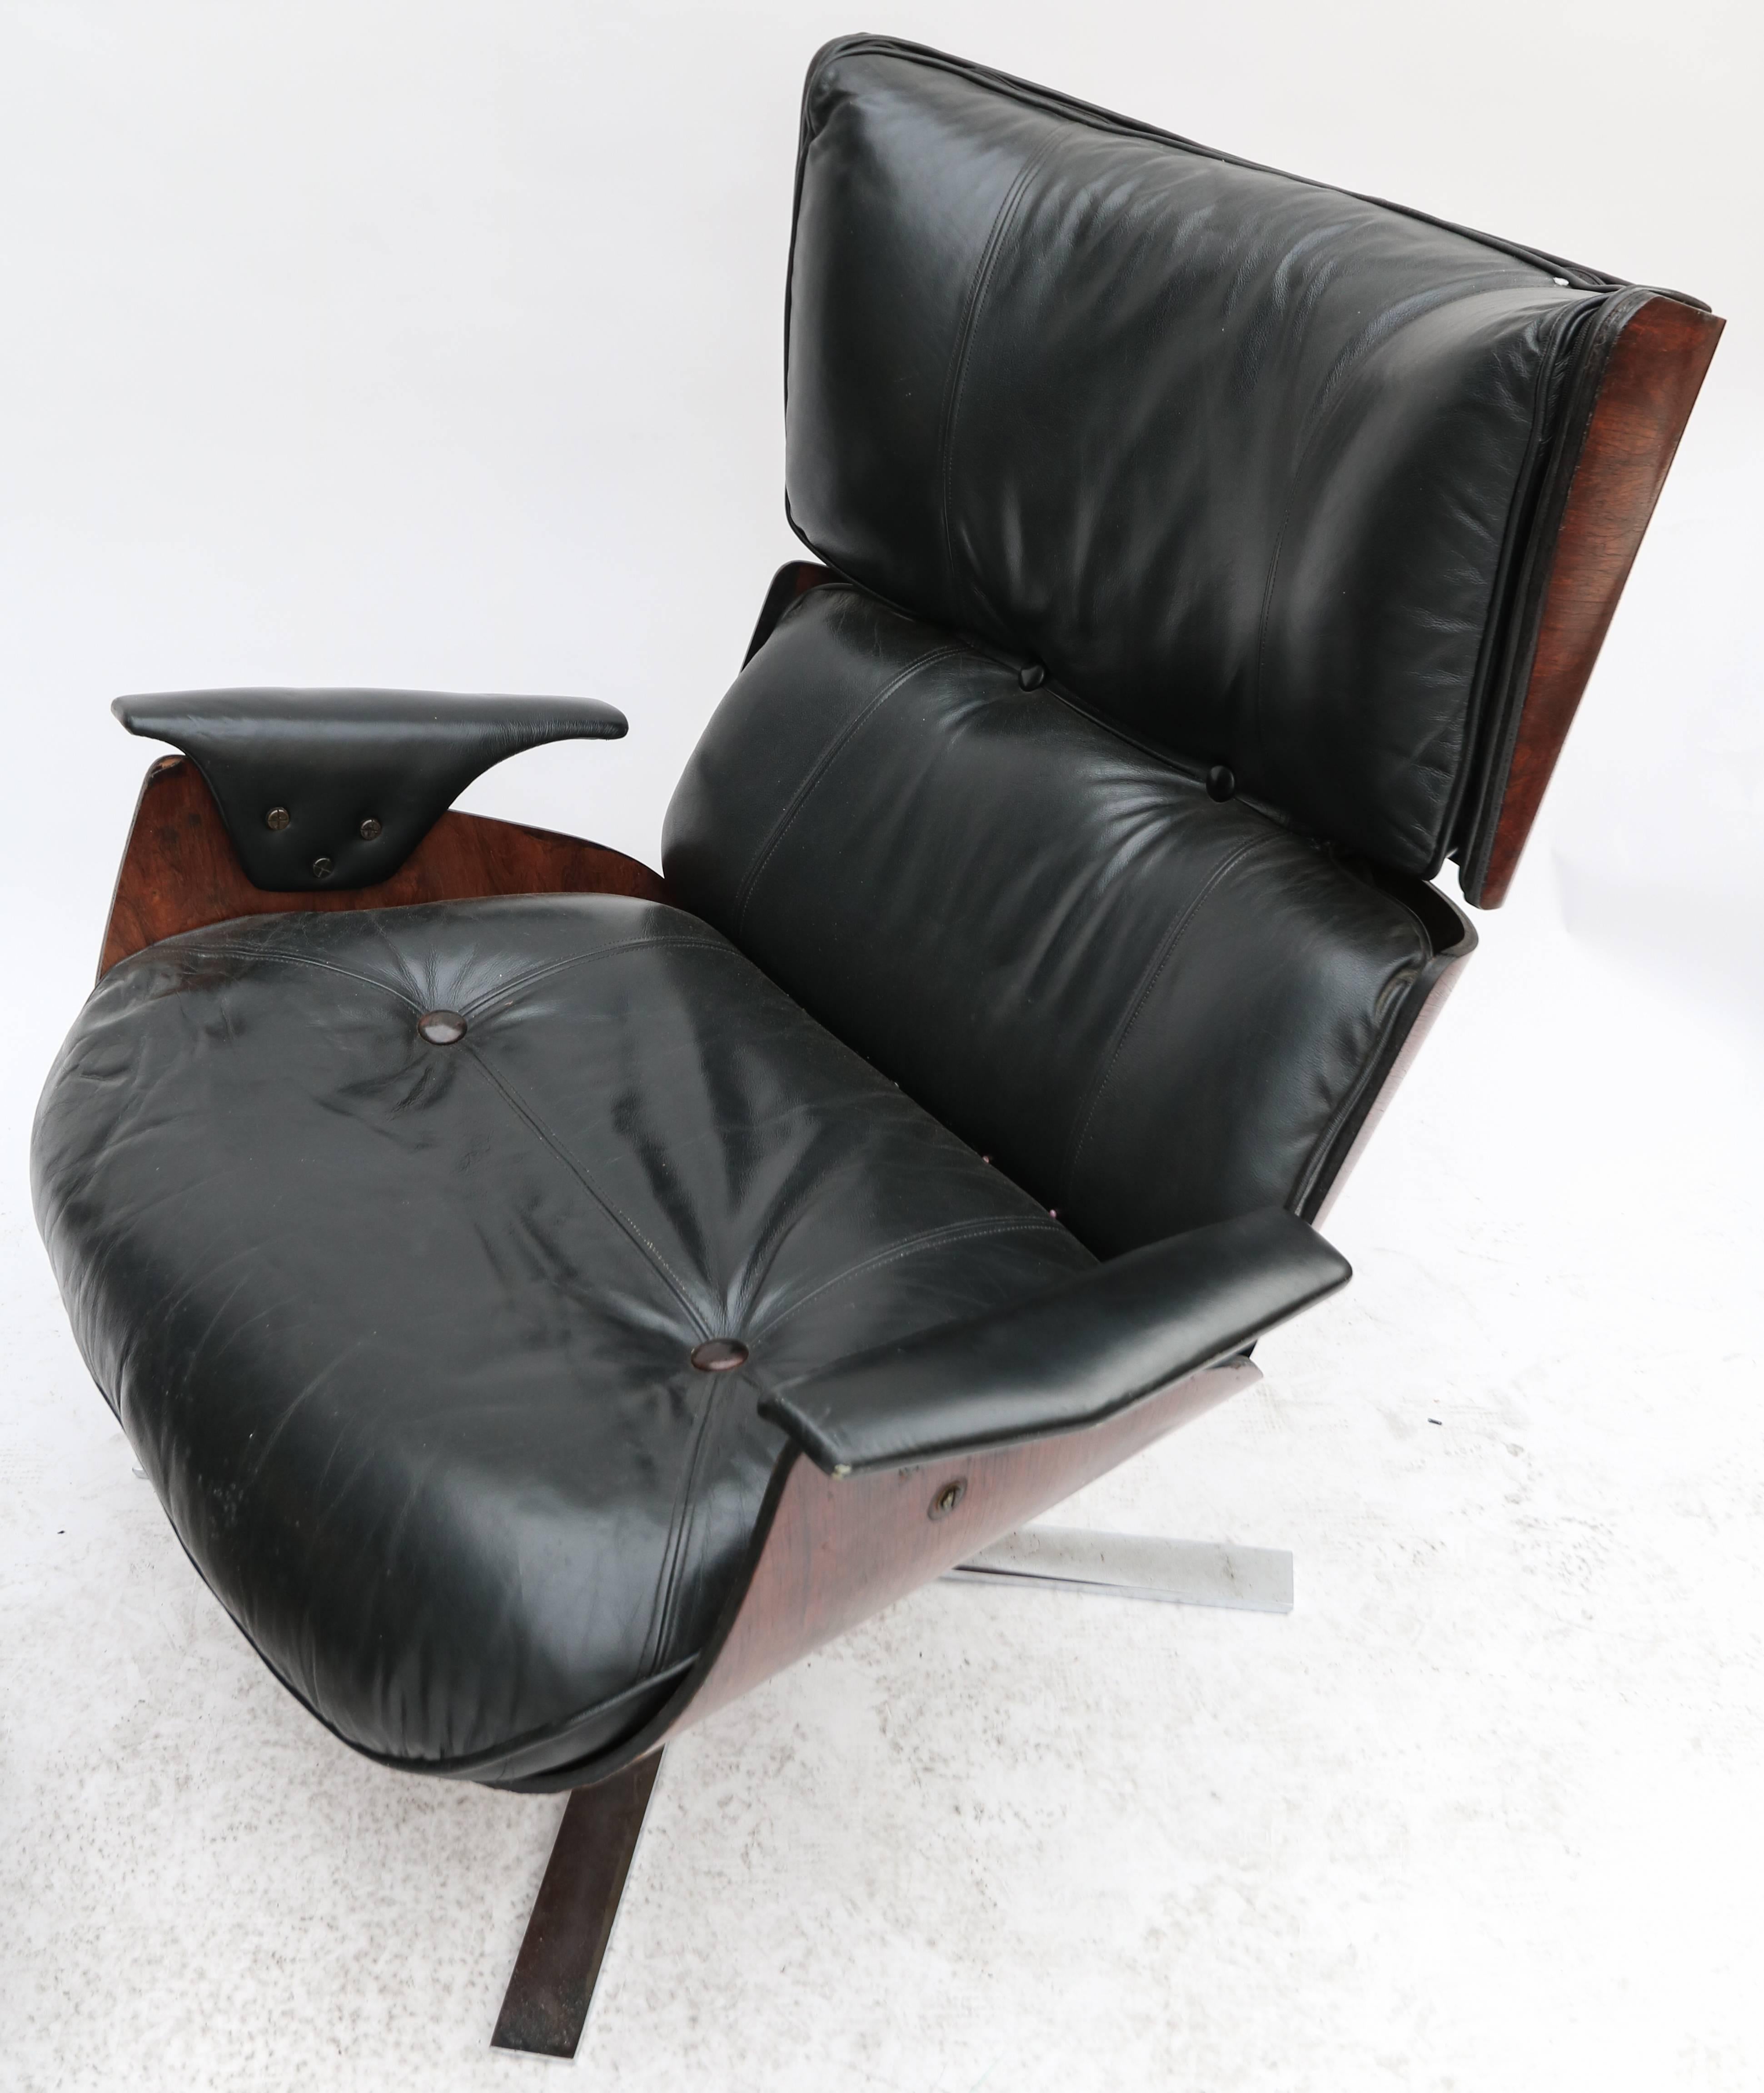 1960s Brazilian jacaranda Paulistana chair and ottoman by Jorge Zalszupin with black leather upholstery

Ottoman dimensions: 29in wide, 21.5in deep, 12.75in high.